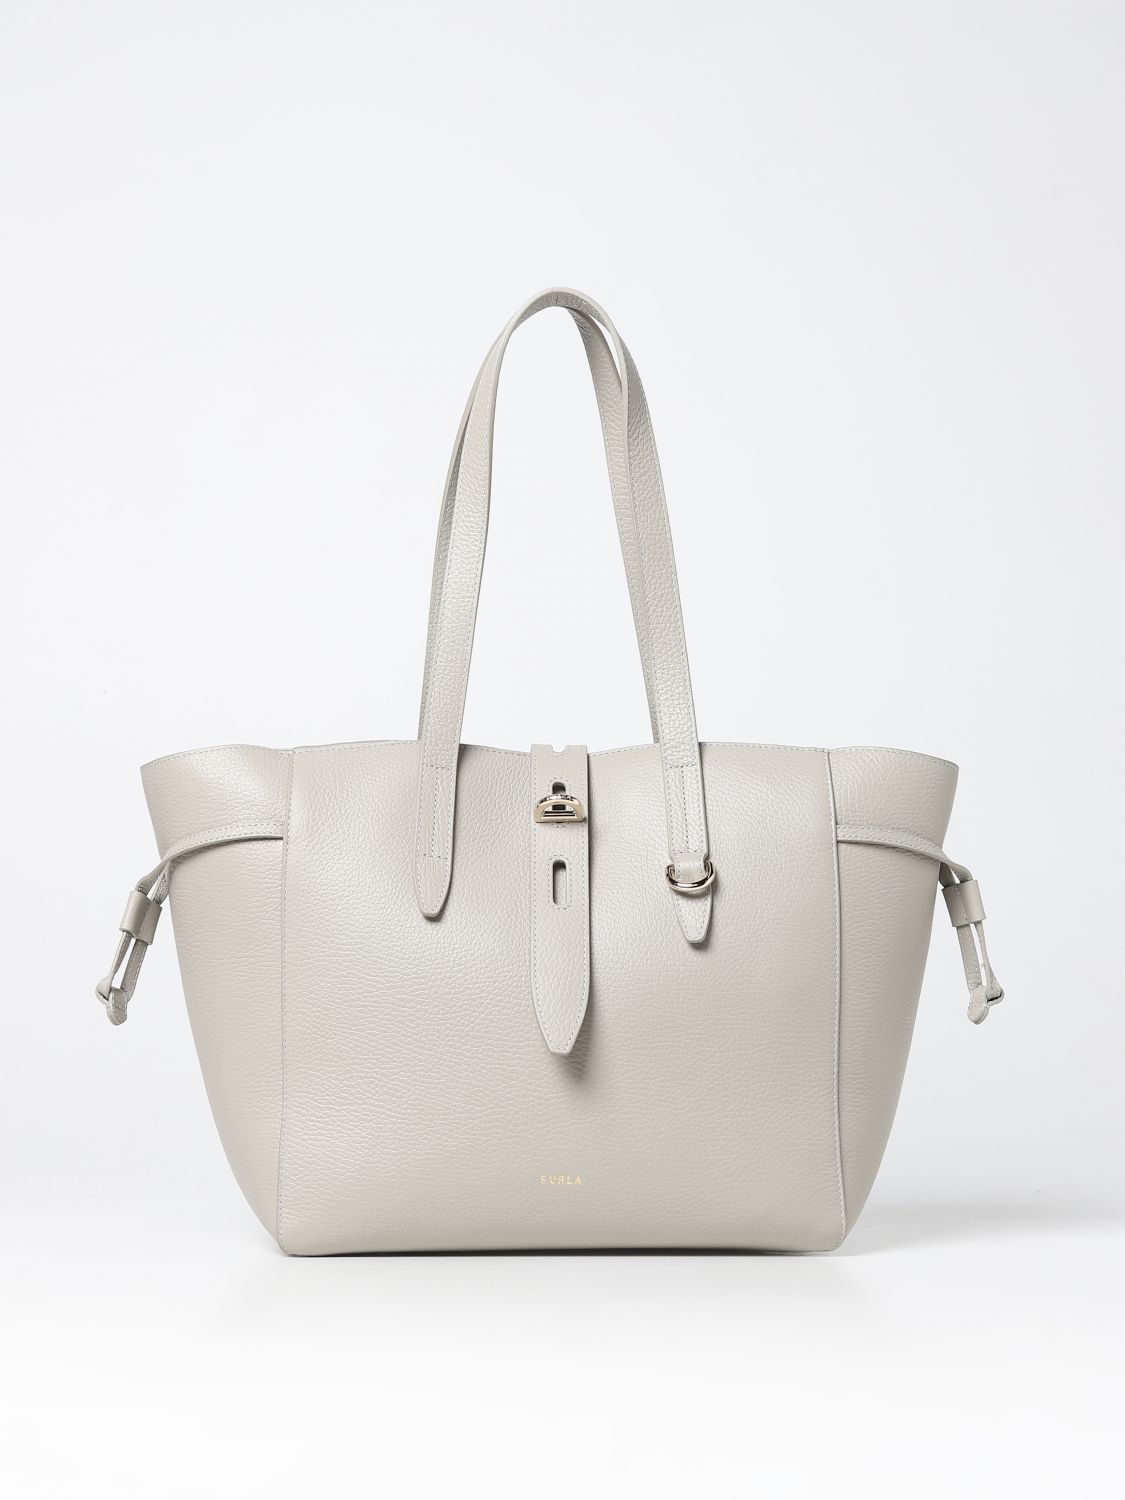 Furla Outlet: tote bags for woman - Dove Grey | Furla tote bags